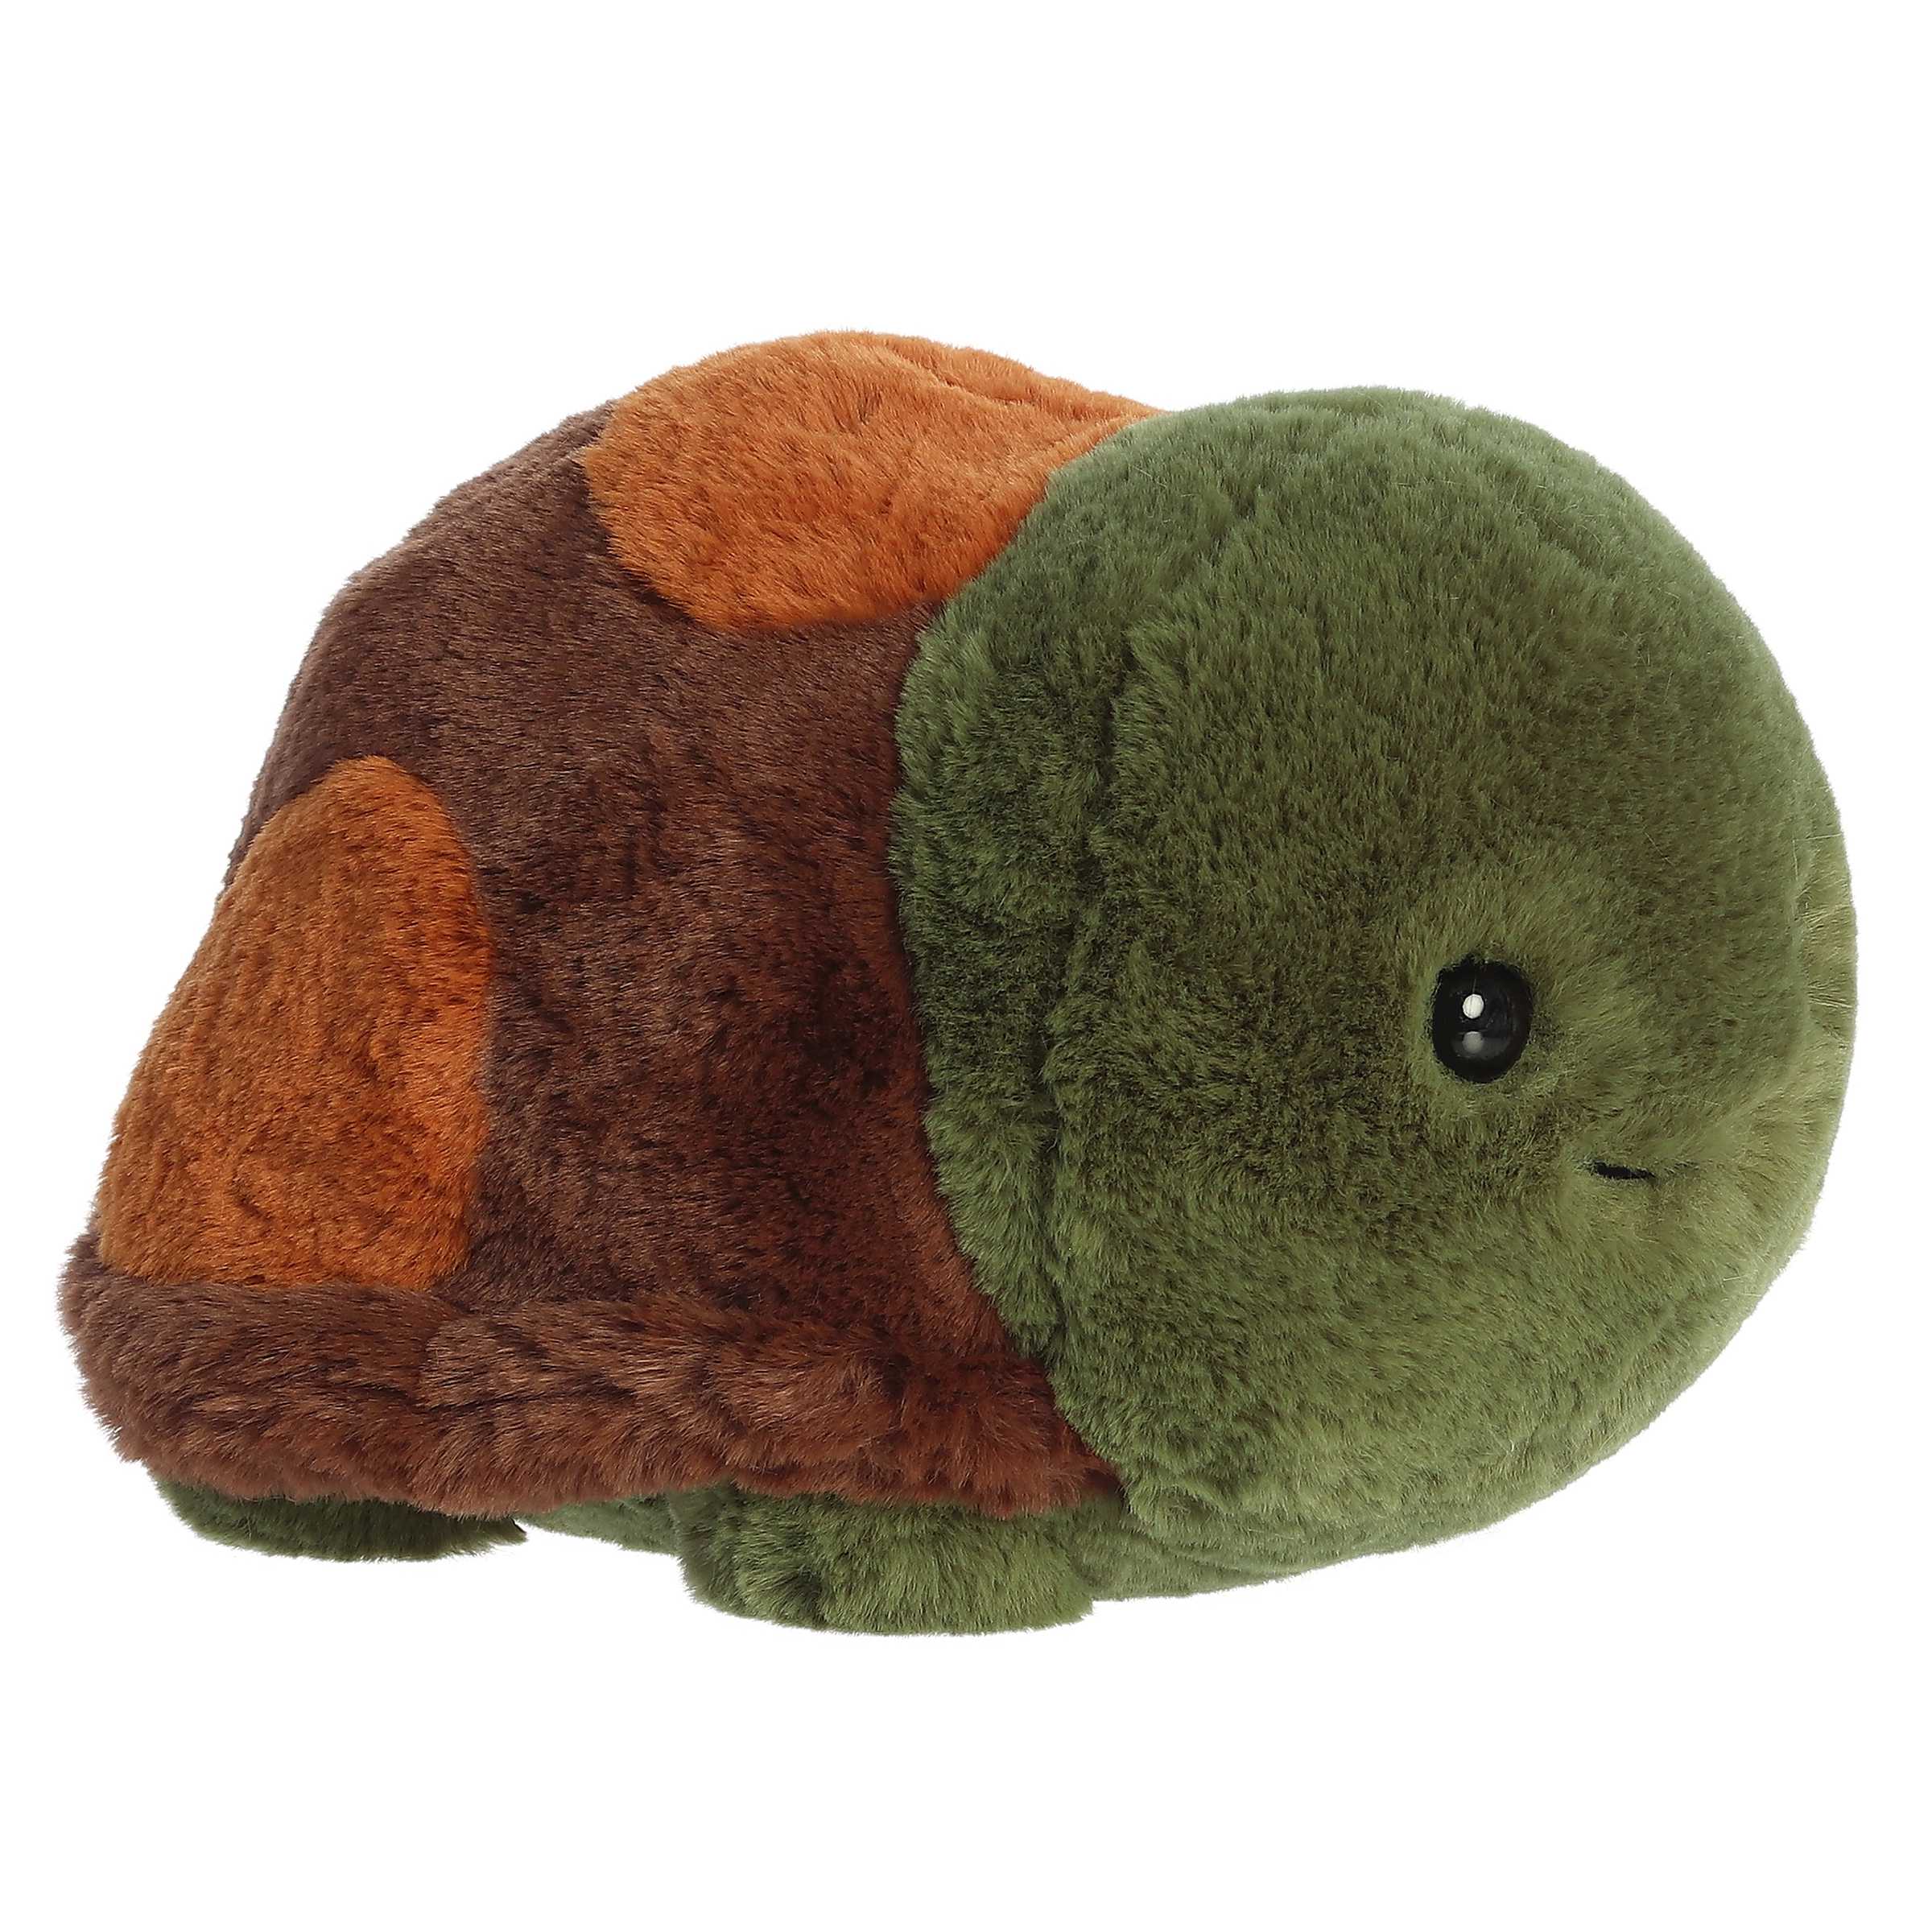 Tony Turtle from Spudsters, a potato-shaped plush with a charming face and soft green shell